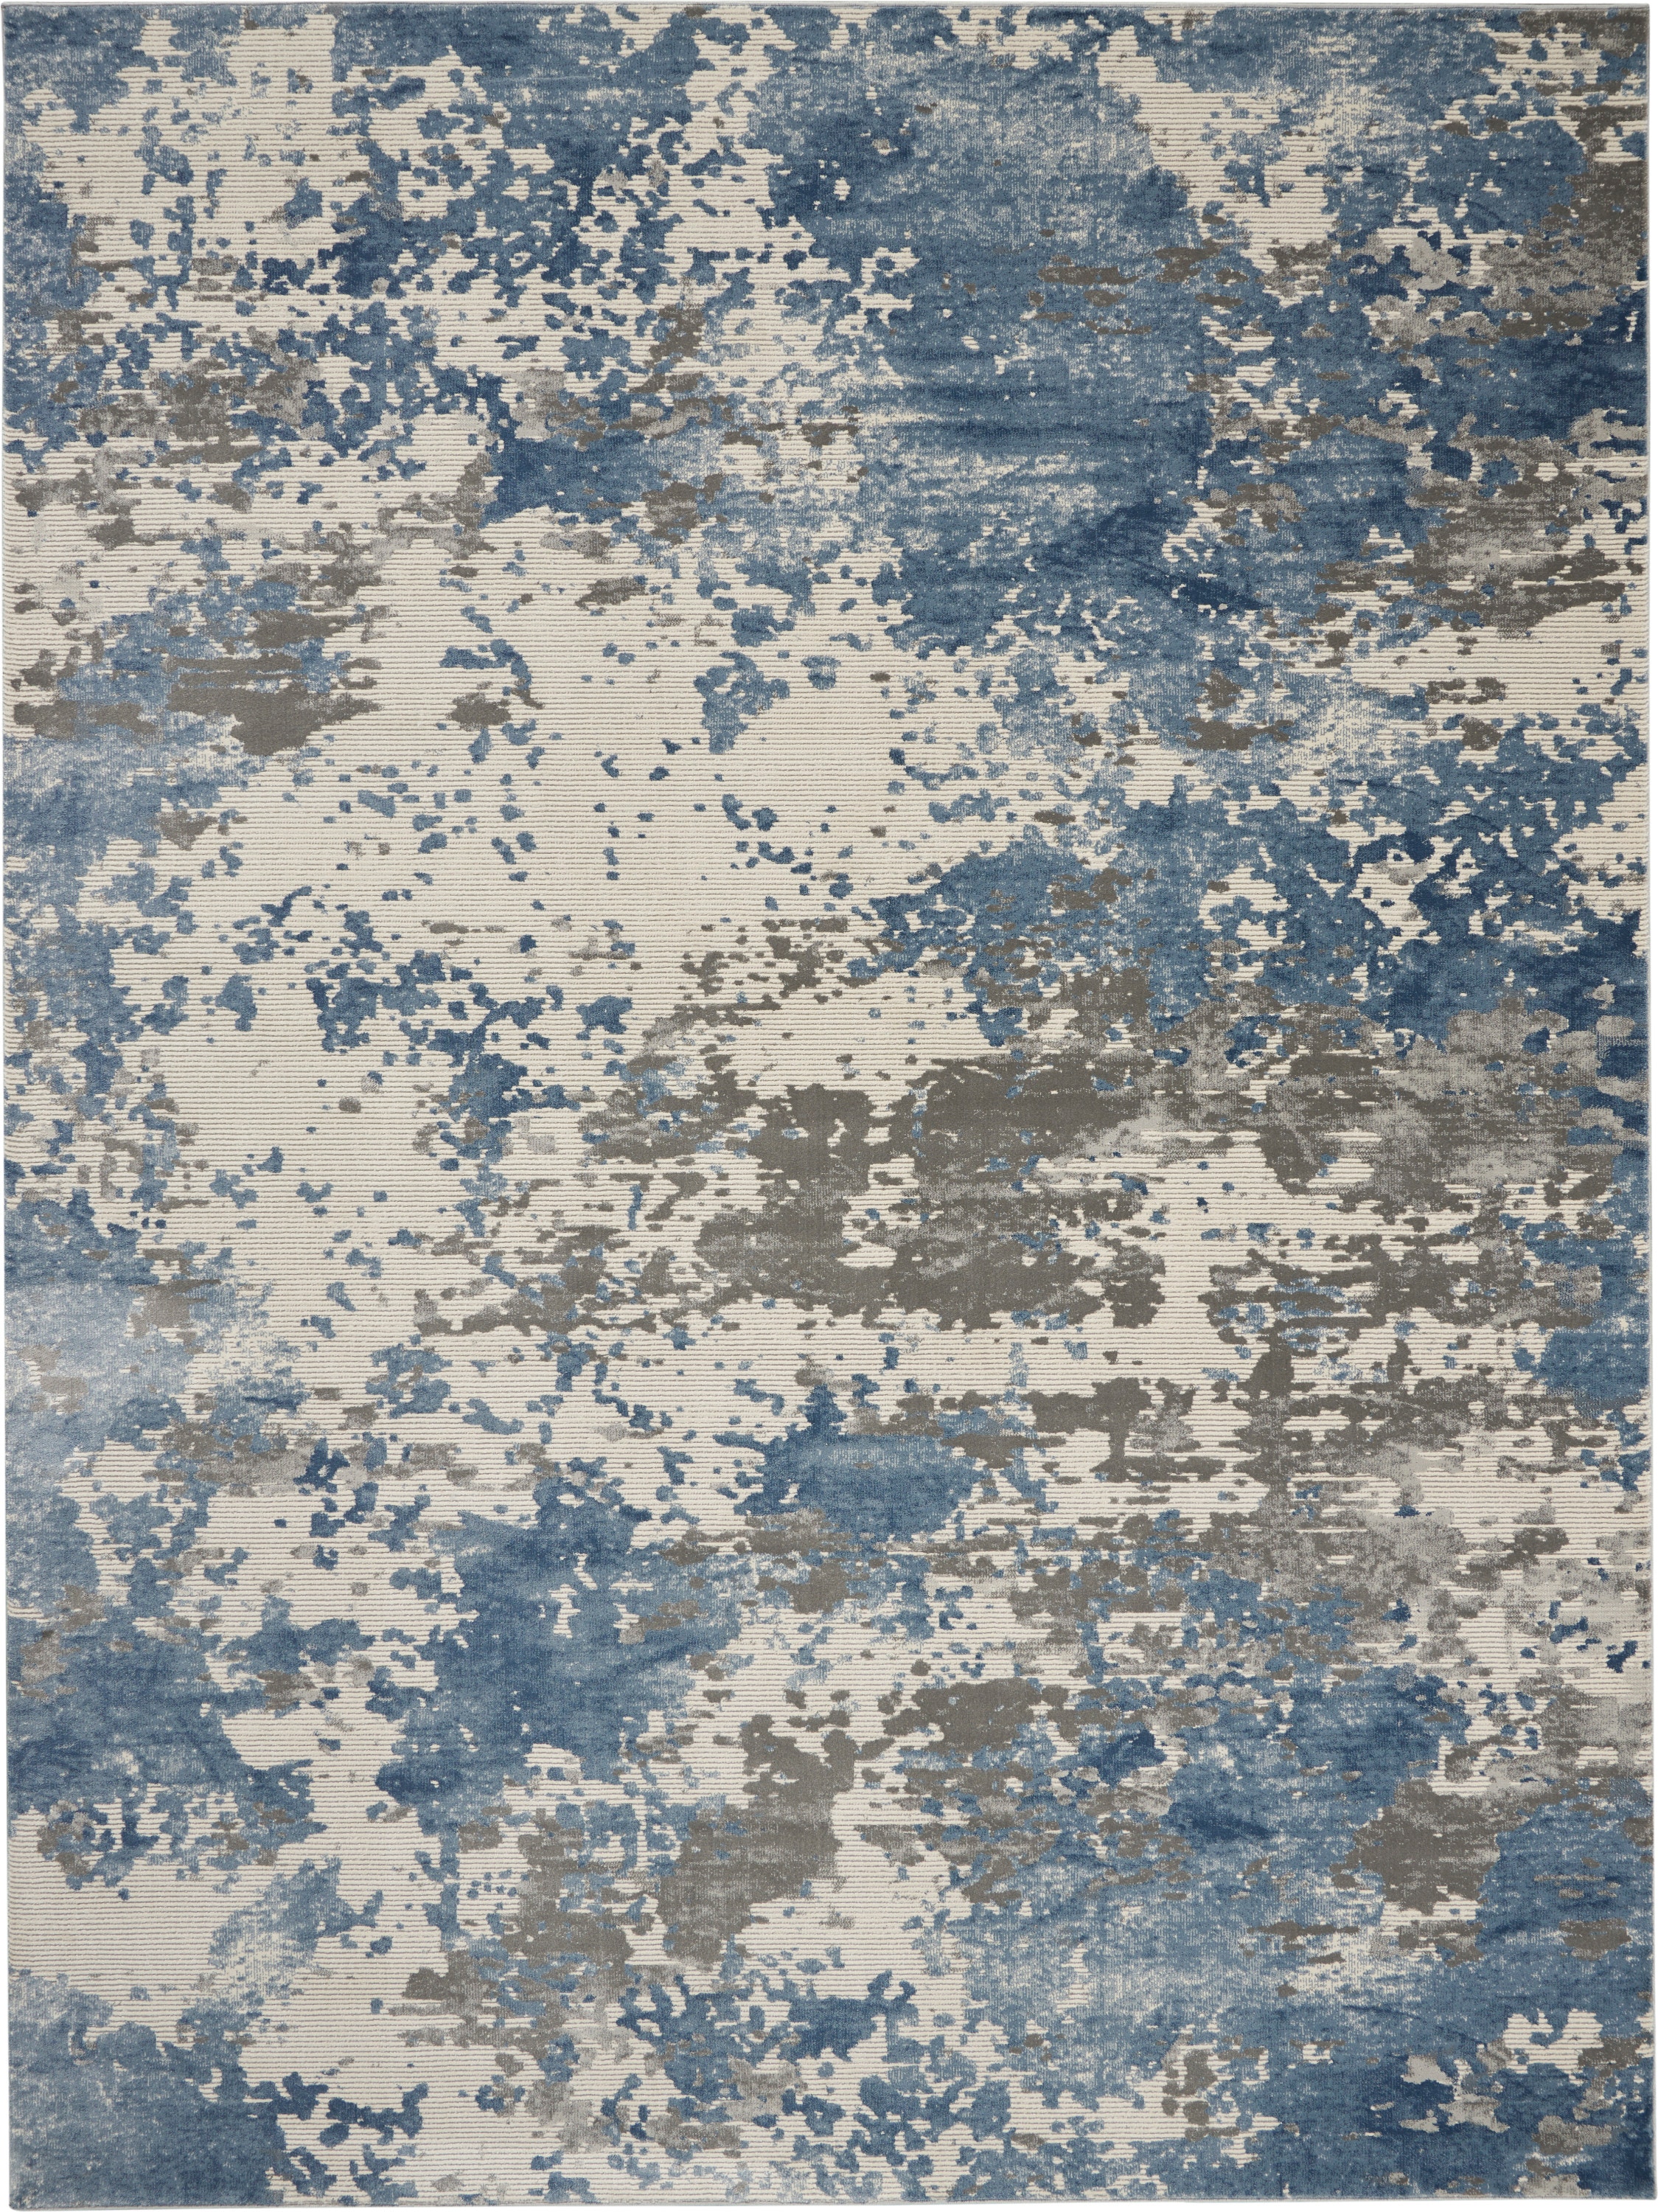 Rug Leather Large Textures 8\'x11\' RUS08 - Rugs Area Grey 099446496362 Home Nourison Rustic Blue and